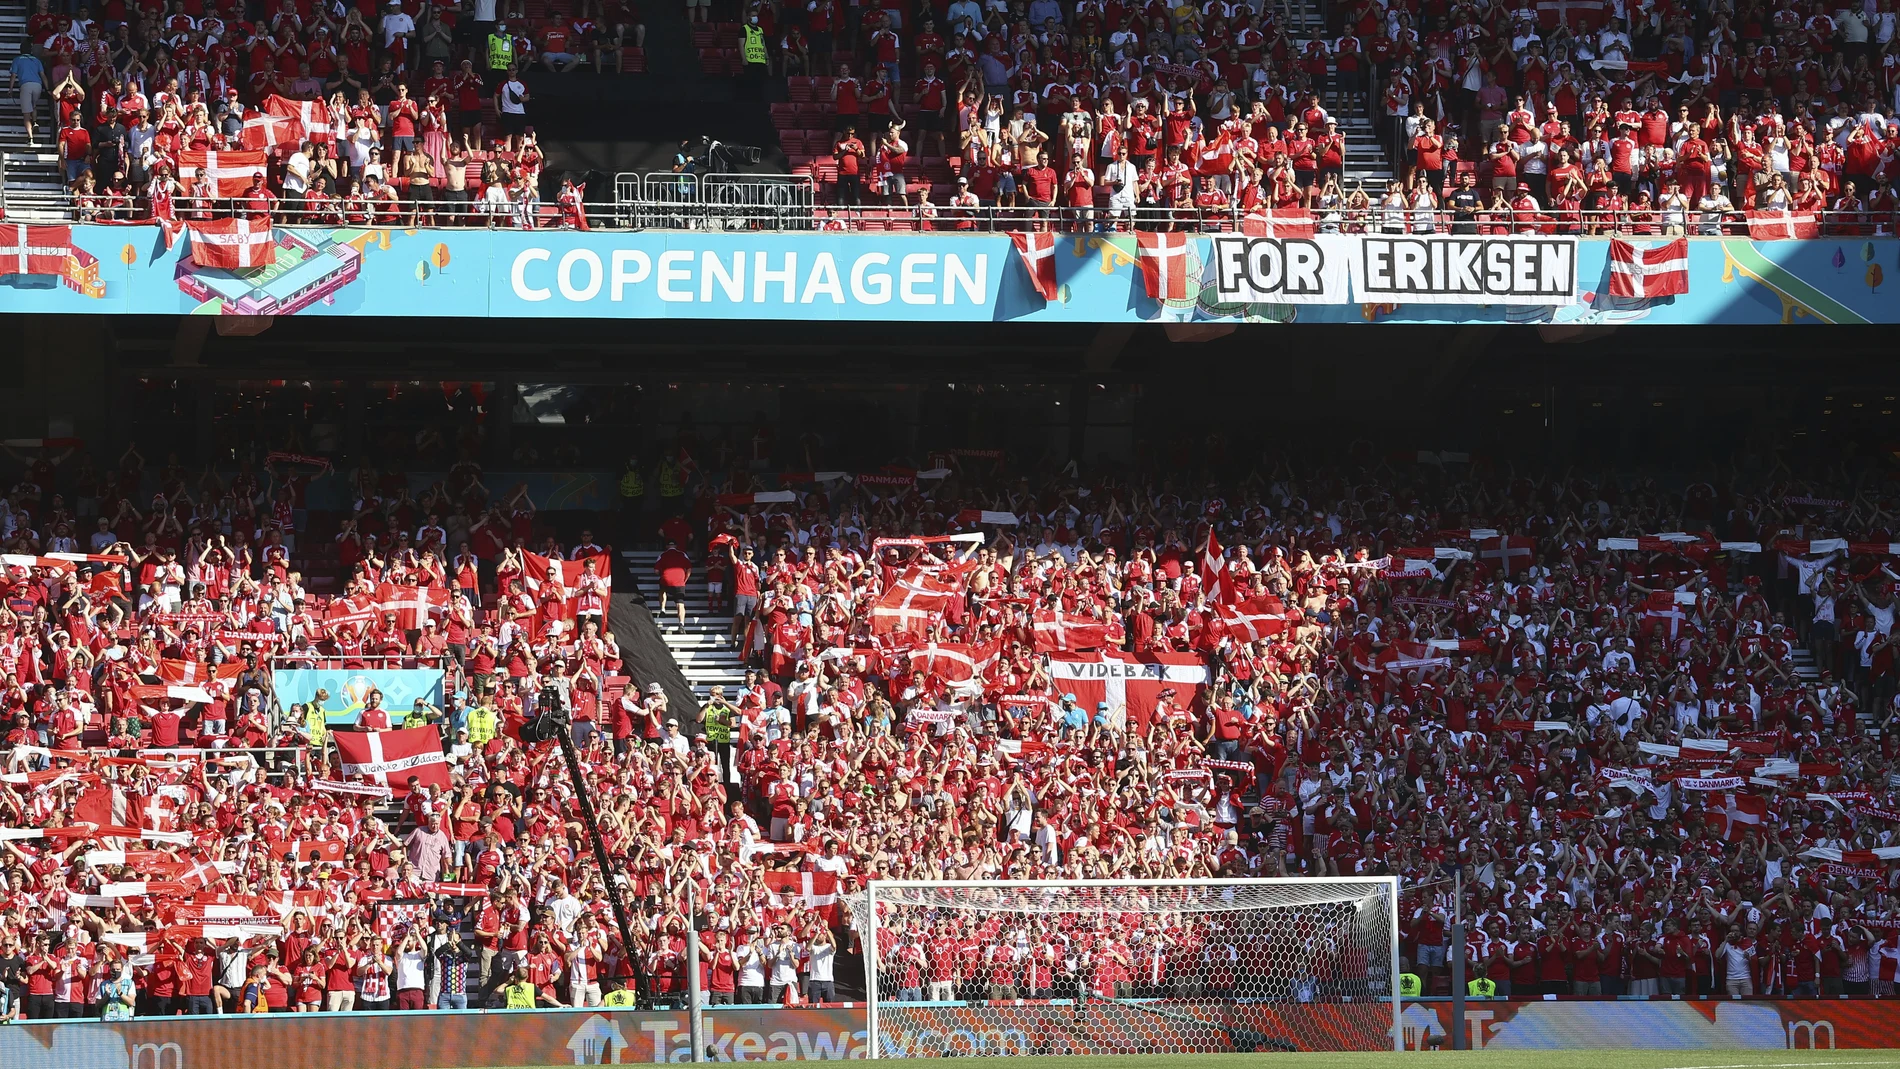 Denmark supporters display a banner for Christian Erikssen, the Danish player who collapsed during the match against Finland last Saturday, June 12, prior to the Euro 2020 soccer championship group B match between Denmark and Belgium, at the Parken stadium in Copenhagen, Thursday, June 17, 2021. (Wolfgang Rattay, Pool via AP)